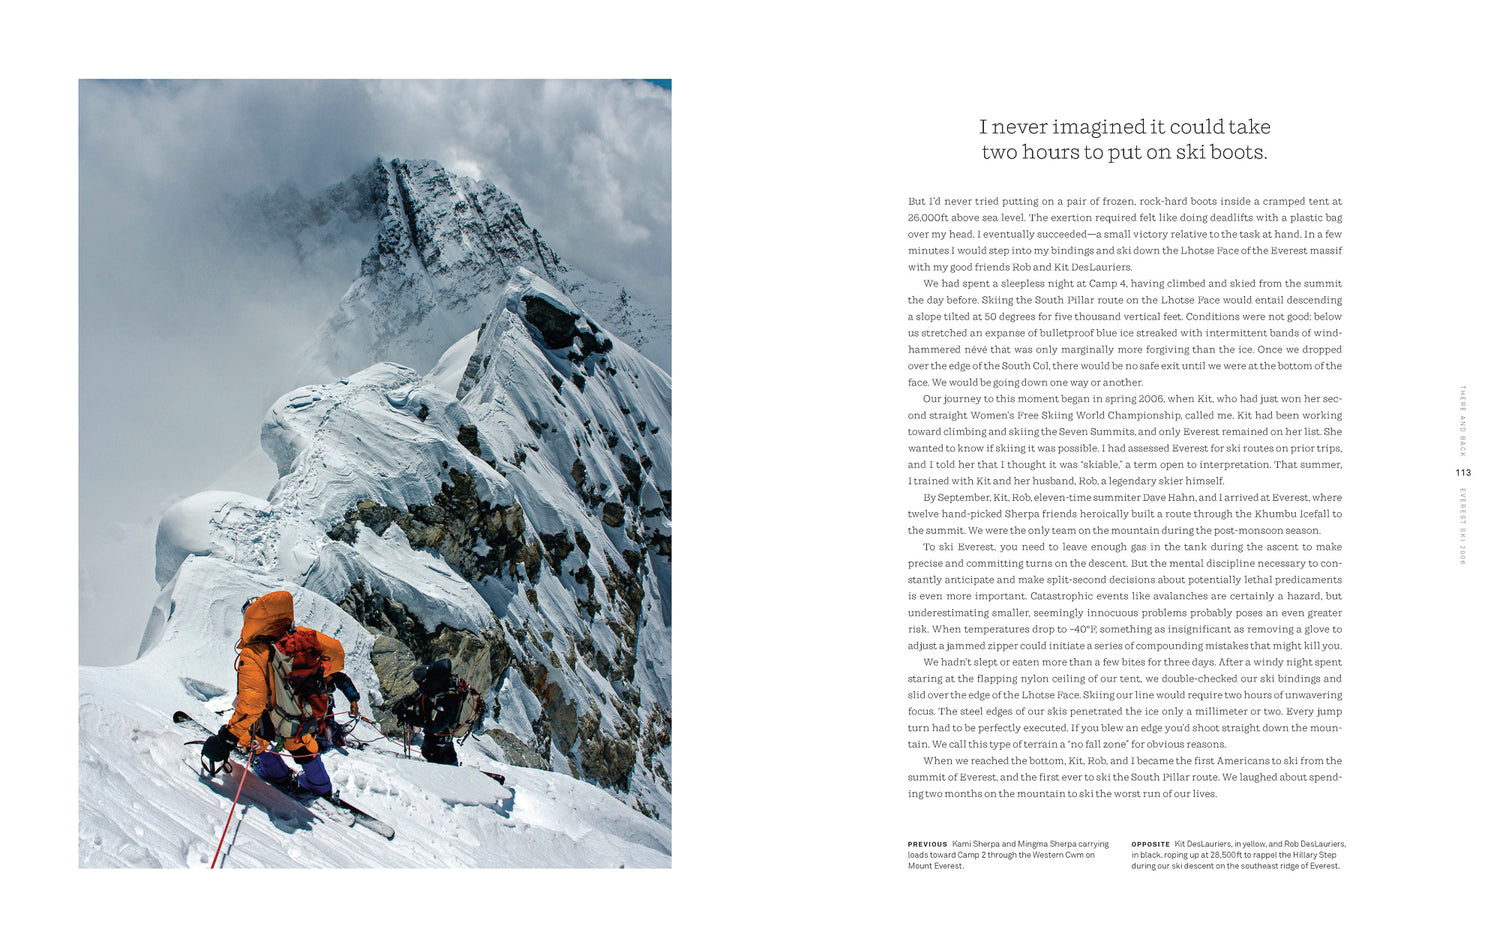 There and Back: Photographs from the Edge - Jimmy Chin